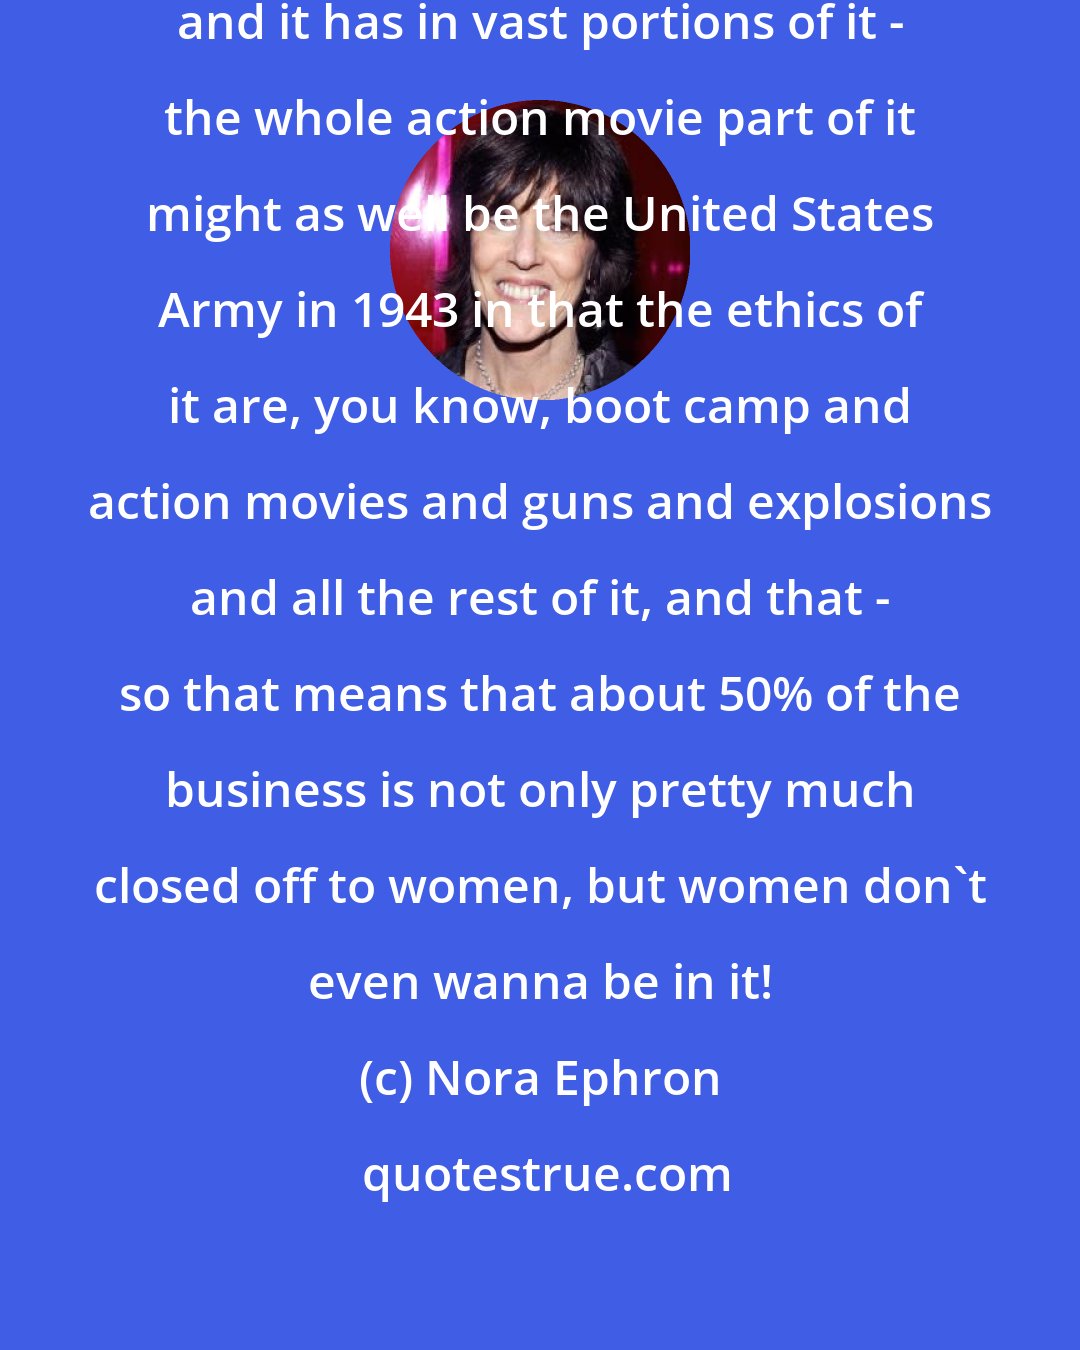 Nora Ephron: Hollywood is a very male business, and it has in vast portions of it - the whole action movie part of it might as well be the United States Army in 1943 in that the ethics of it are, you know, boot camp and action movies and guns and explosions and all the rest of it, and that - so that means that about 50% of the business is not only pretty much closed off to women, but women don't even wanna be in it!